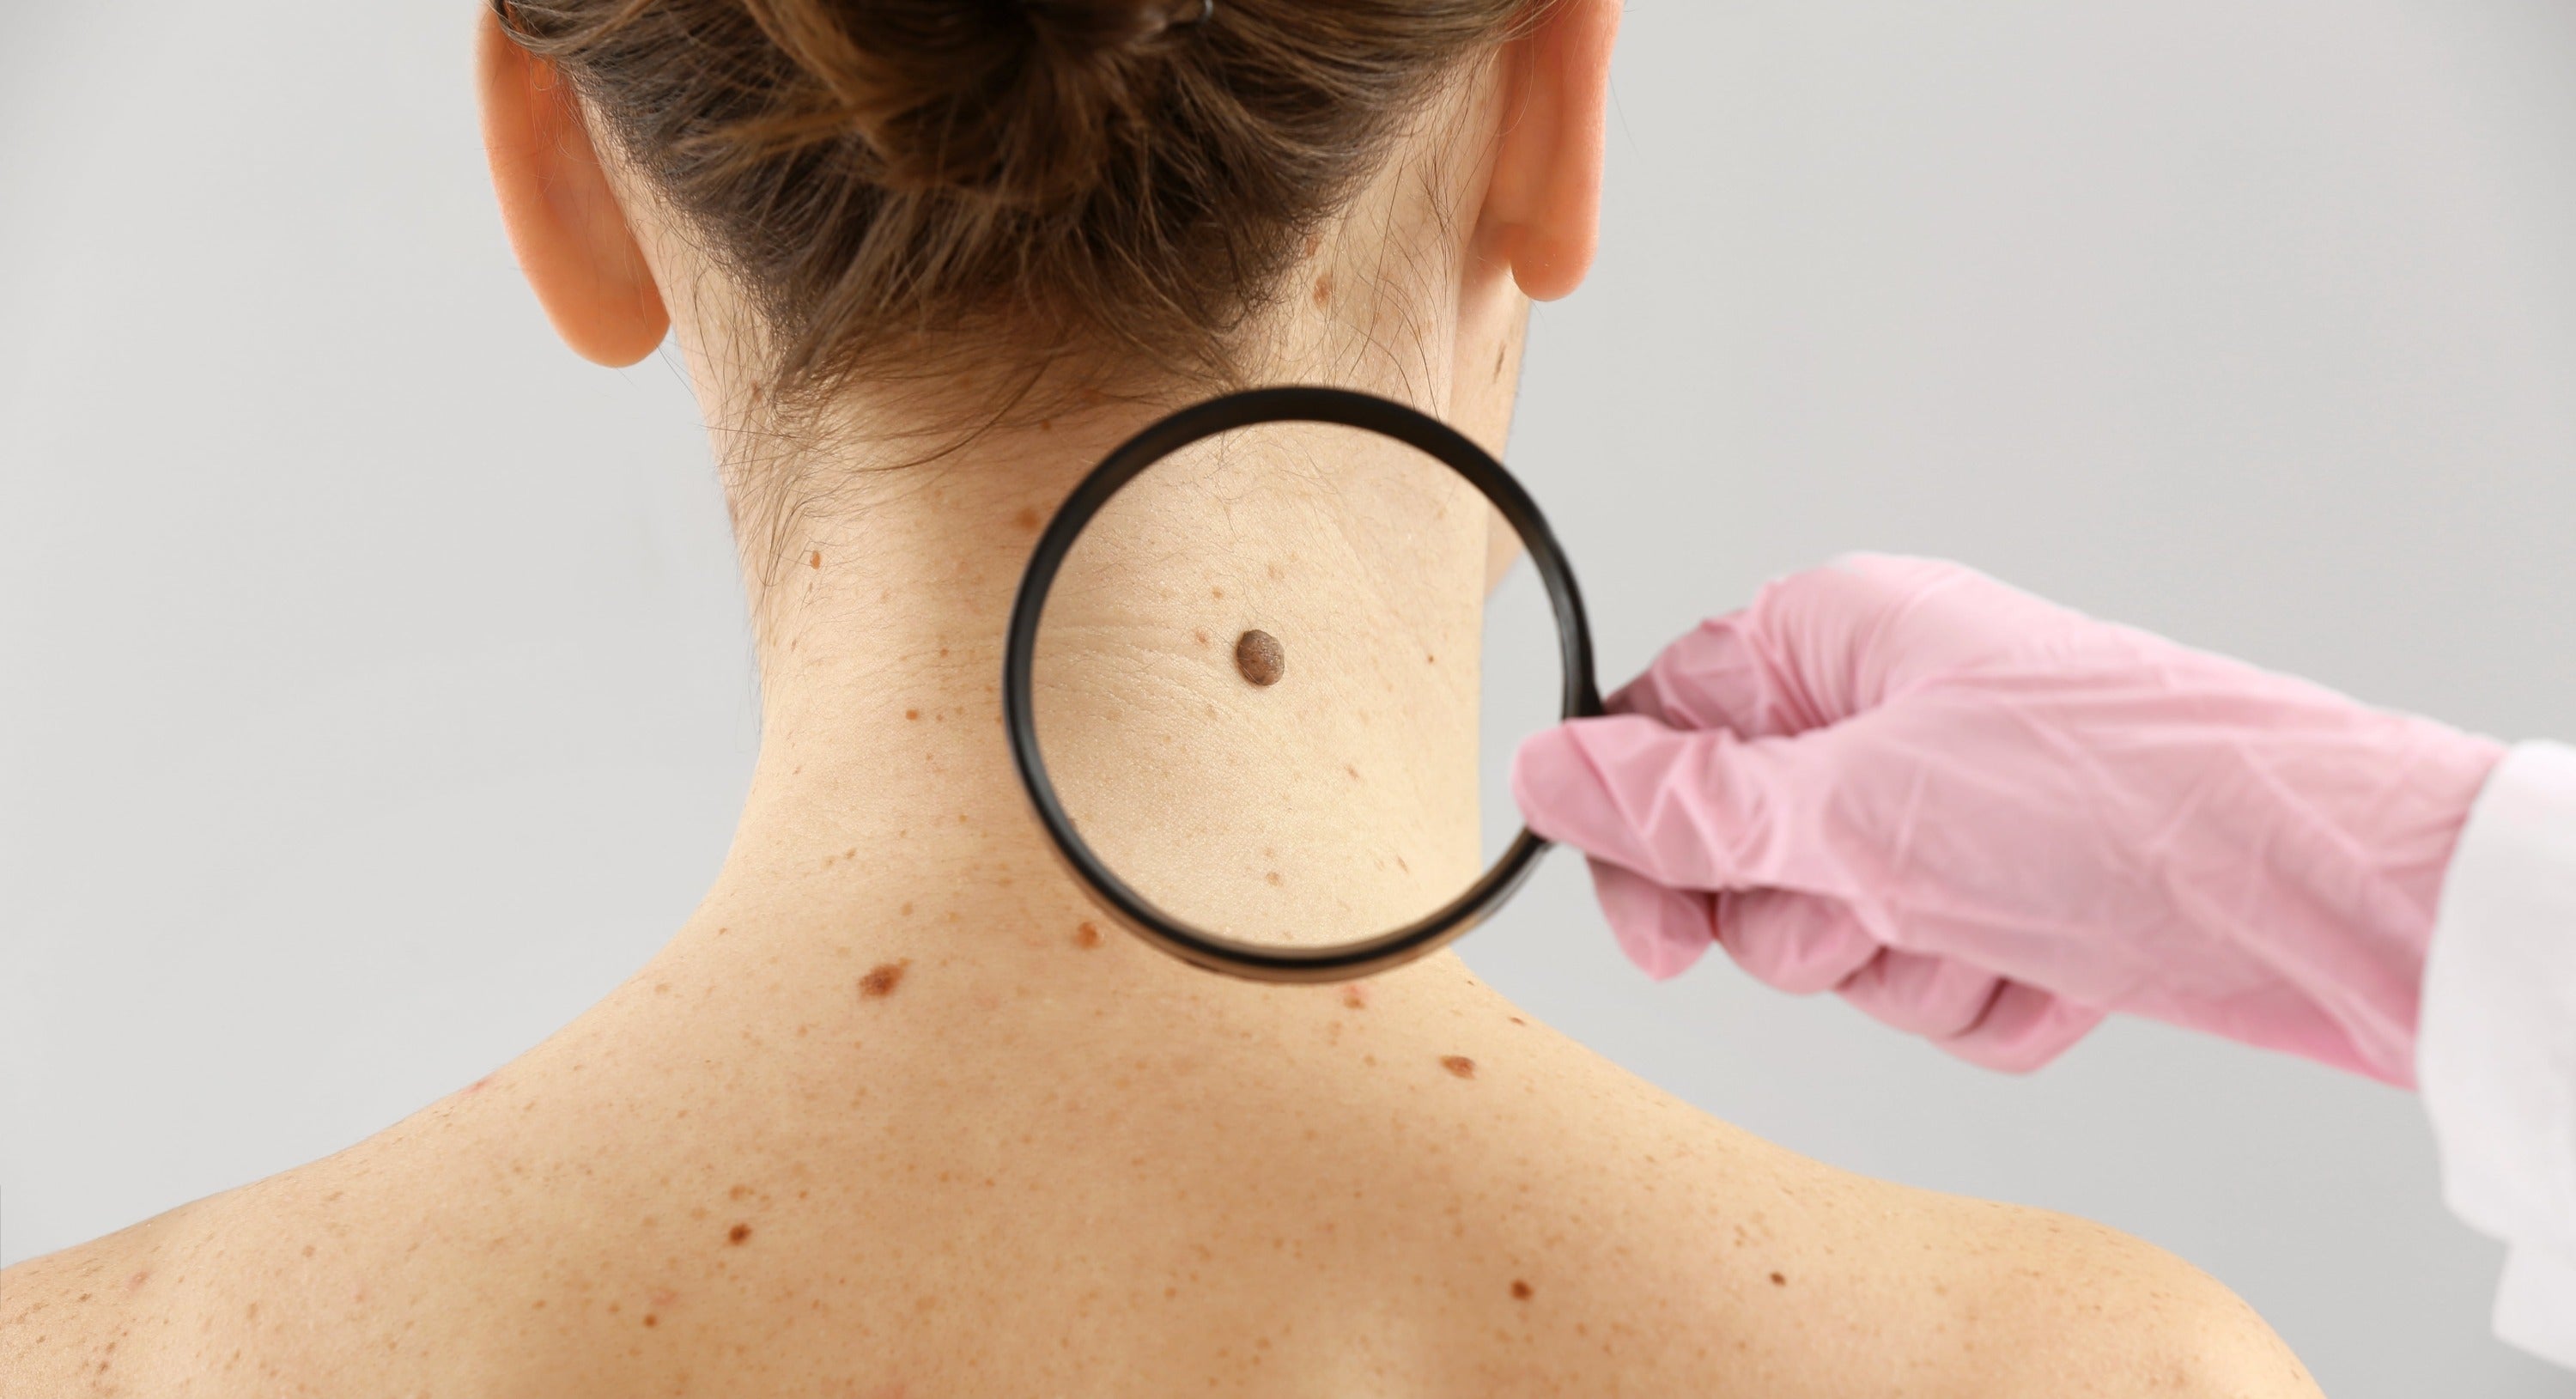 Modifiable Risk Factors for Skin Cancers